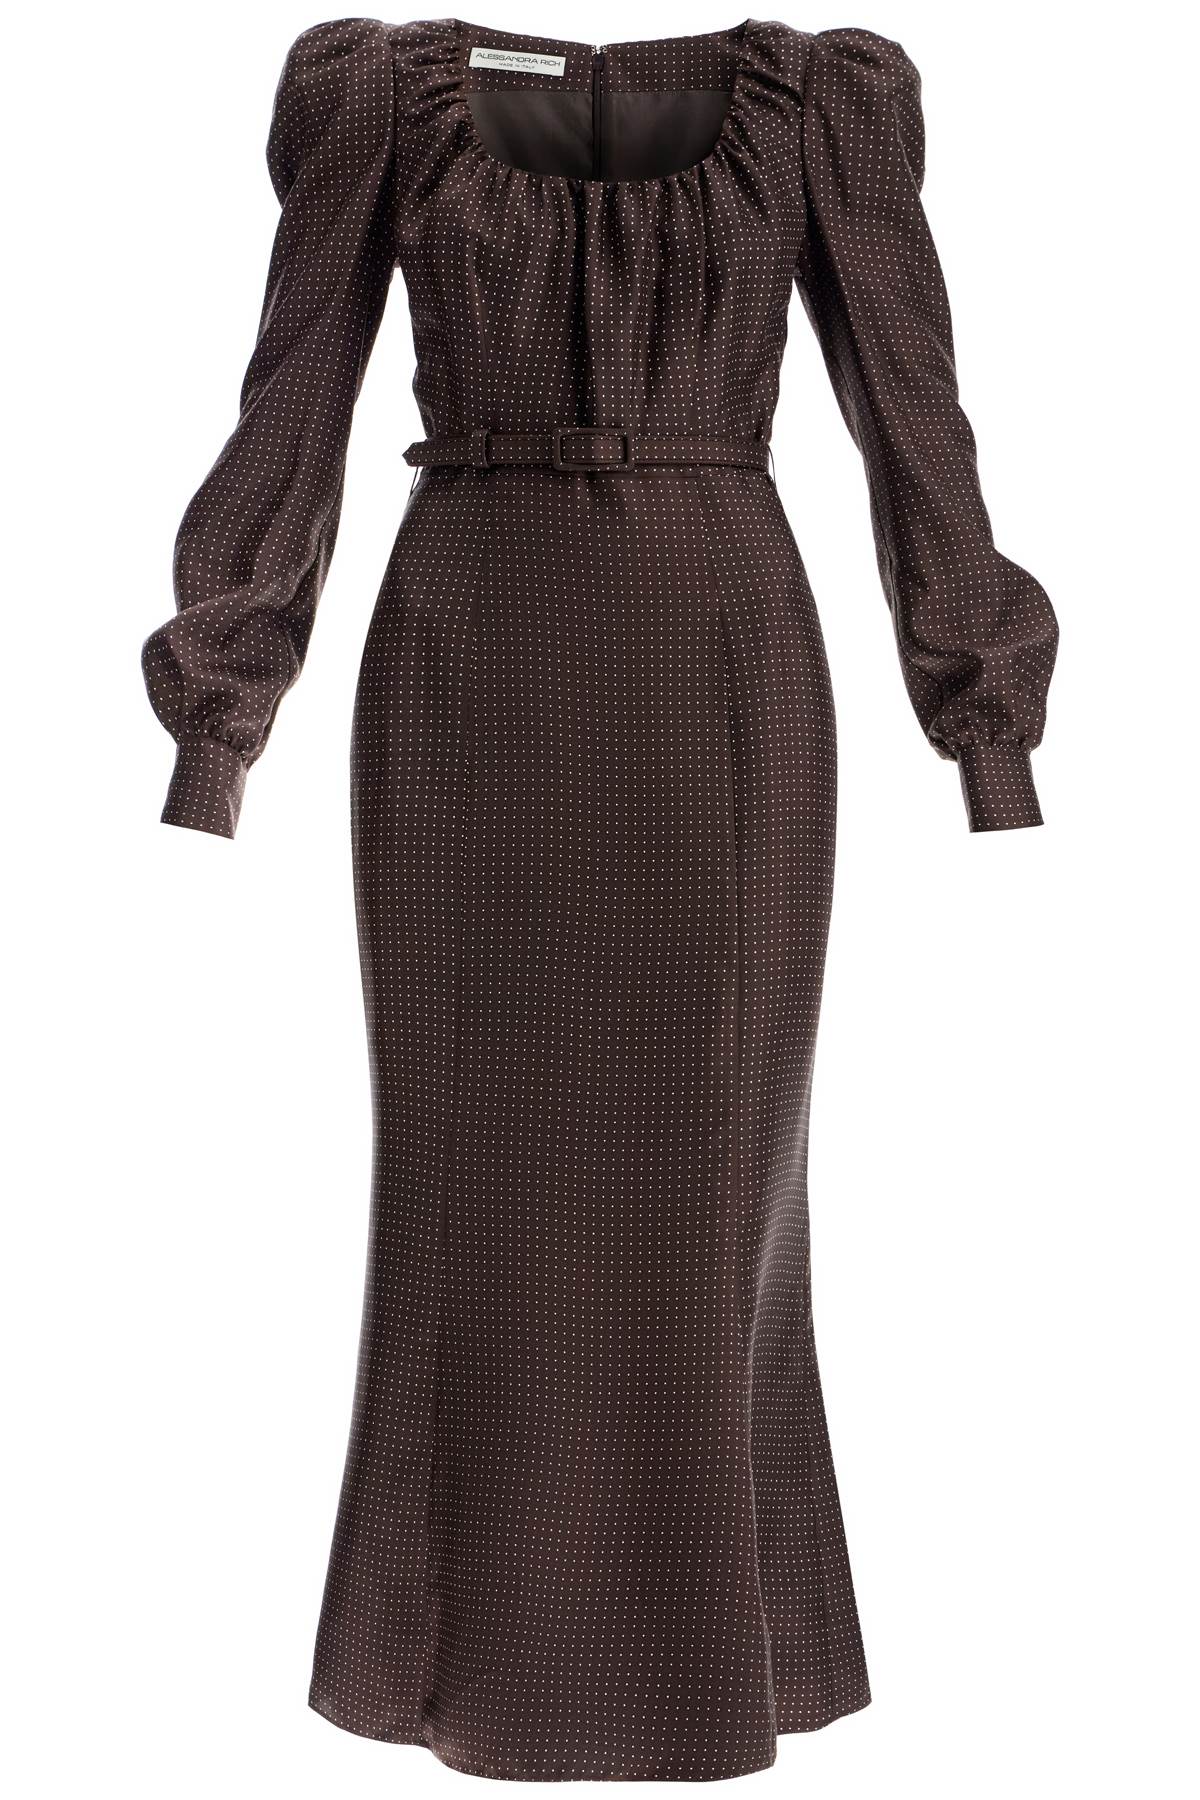 Alessandra Rich "polka Dot Silk Midi Dressreplace With Double Quote   Brown